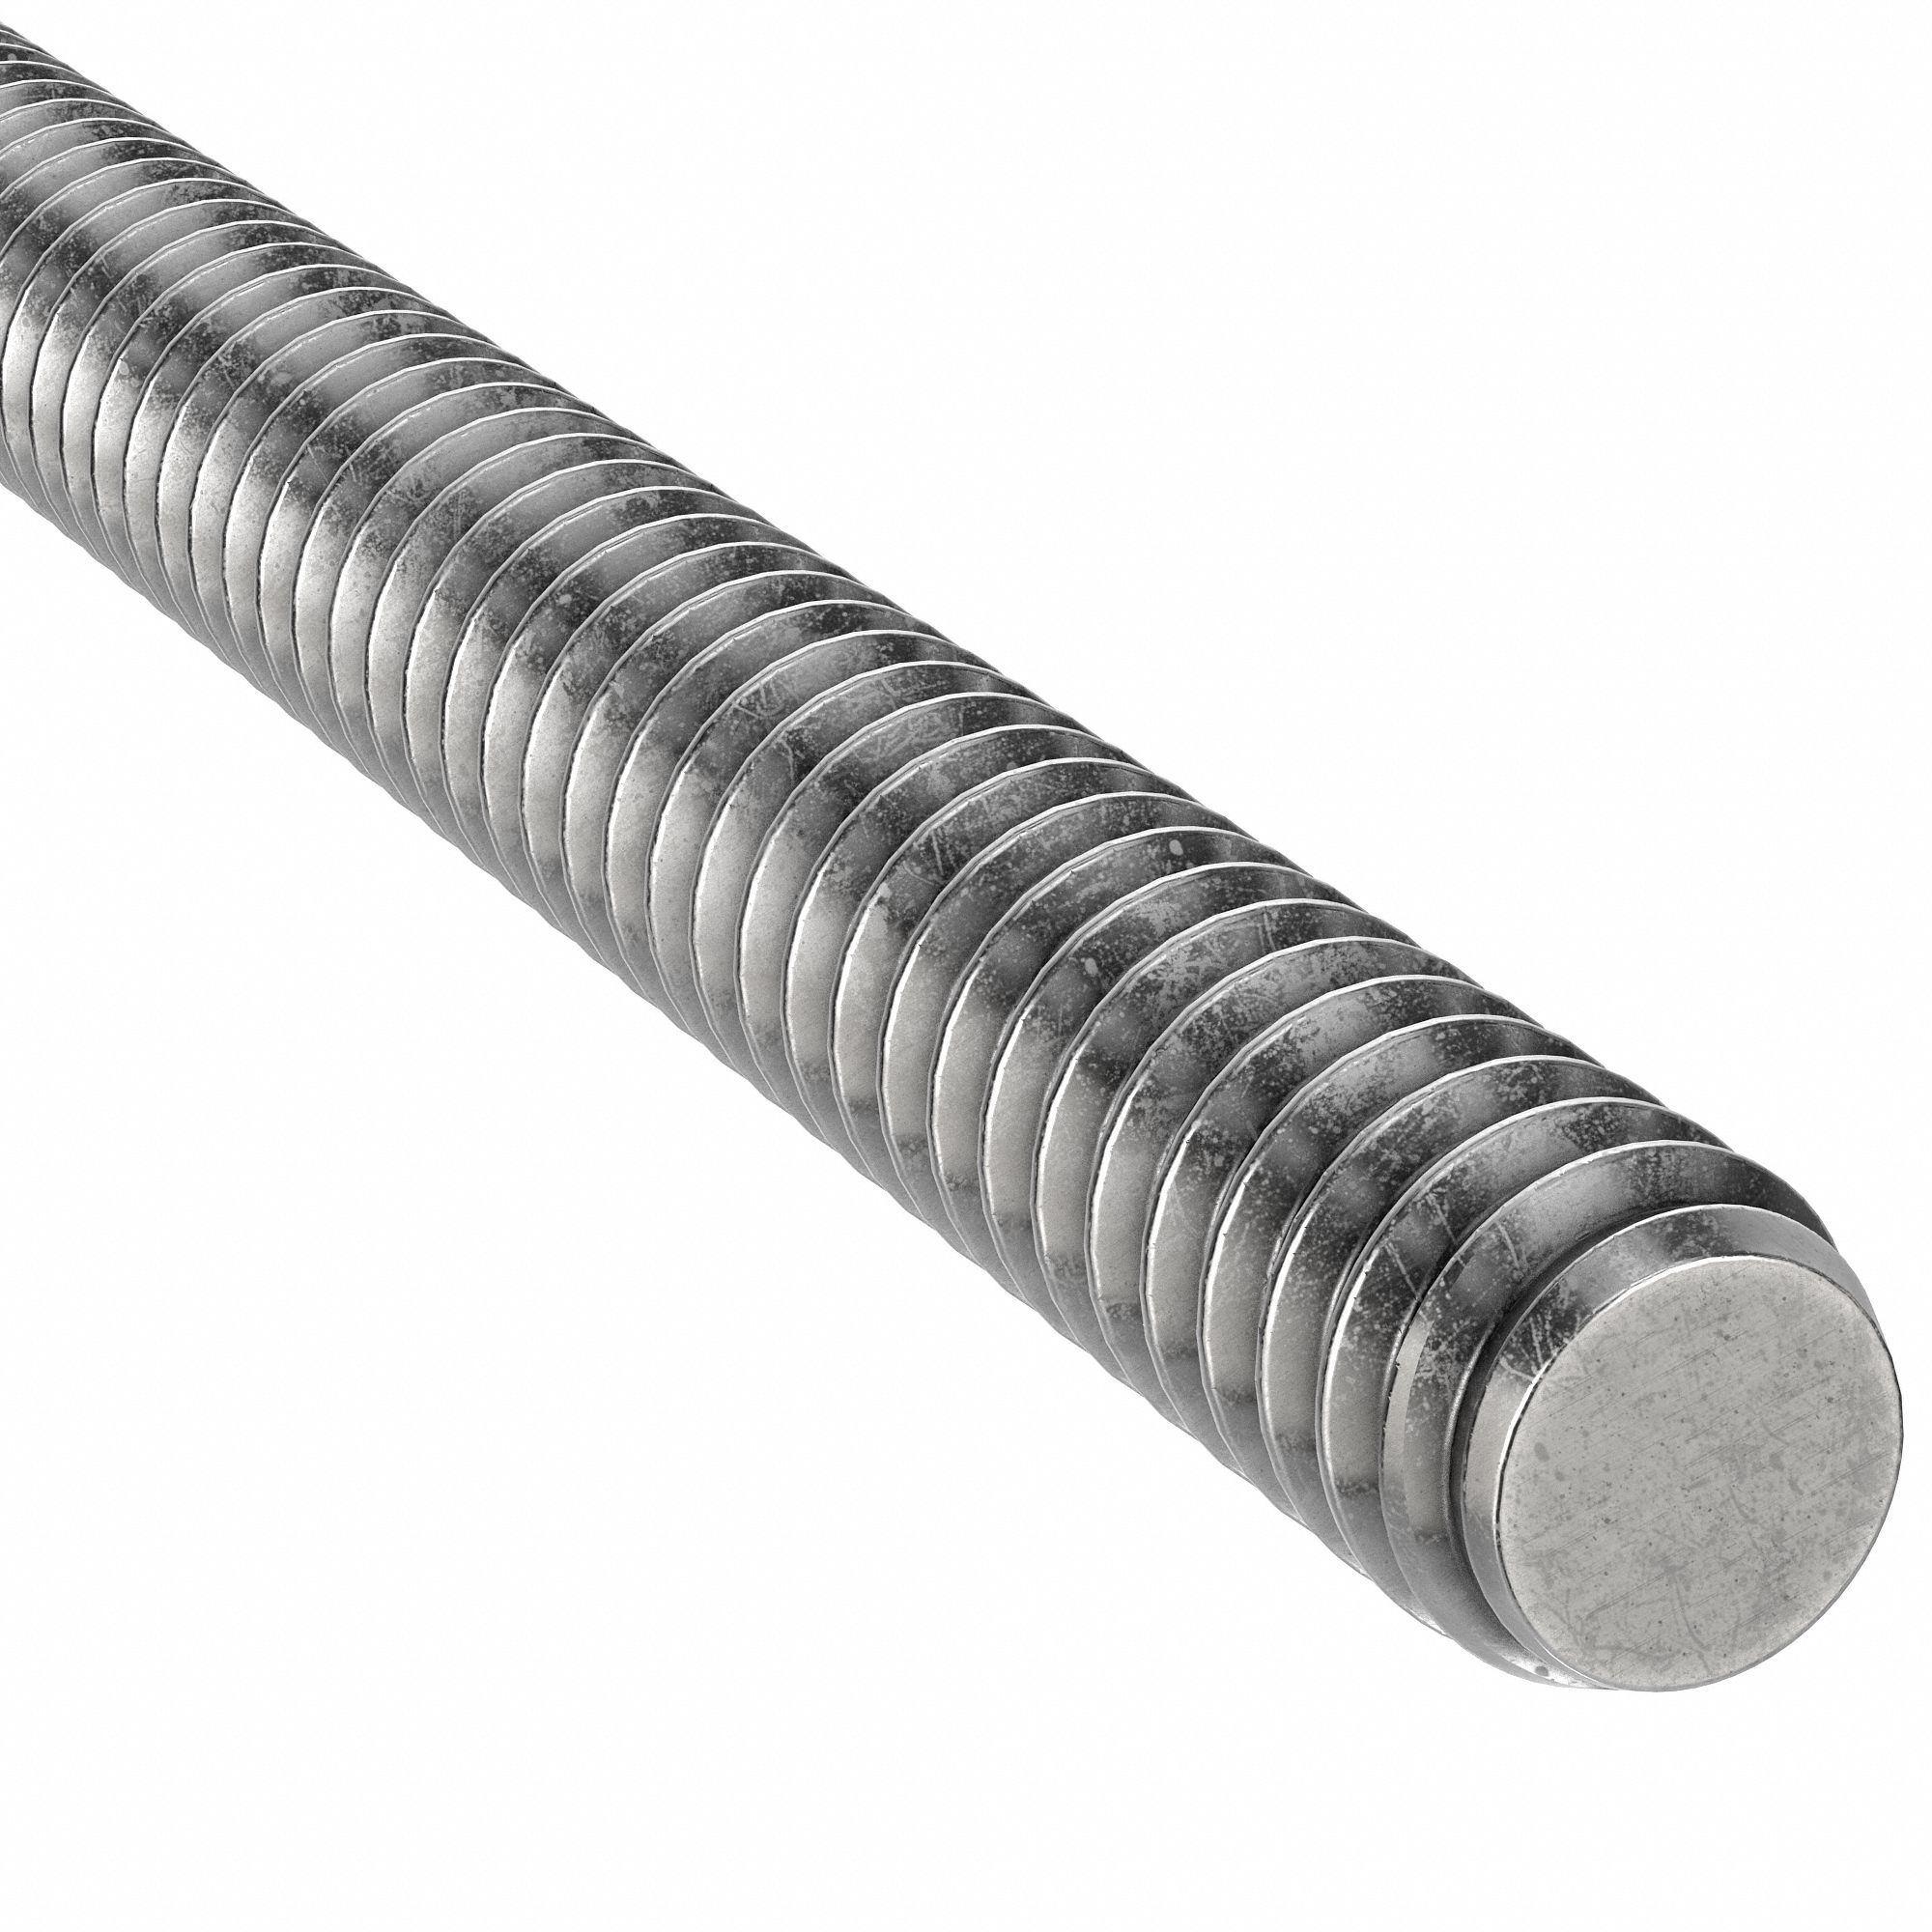 Allthread 5/16 UNC 30mm-910mm 18 TPI Stainless Steel #304 Threaded Rod All Size 